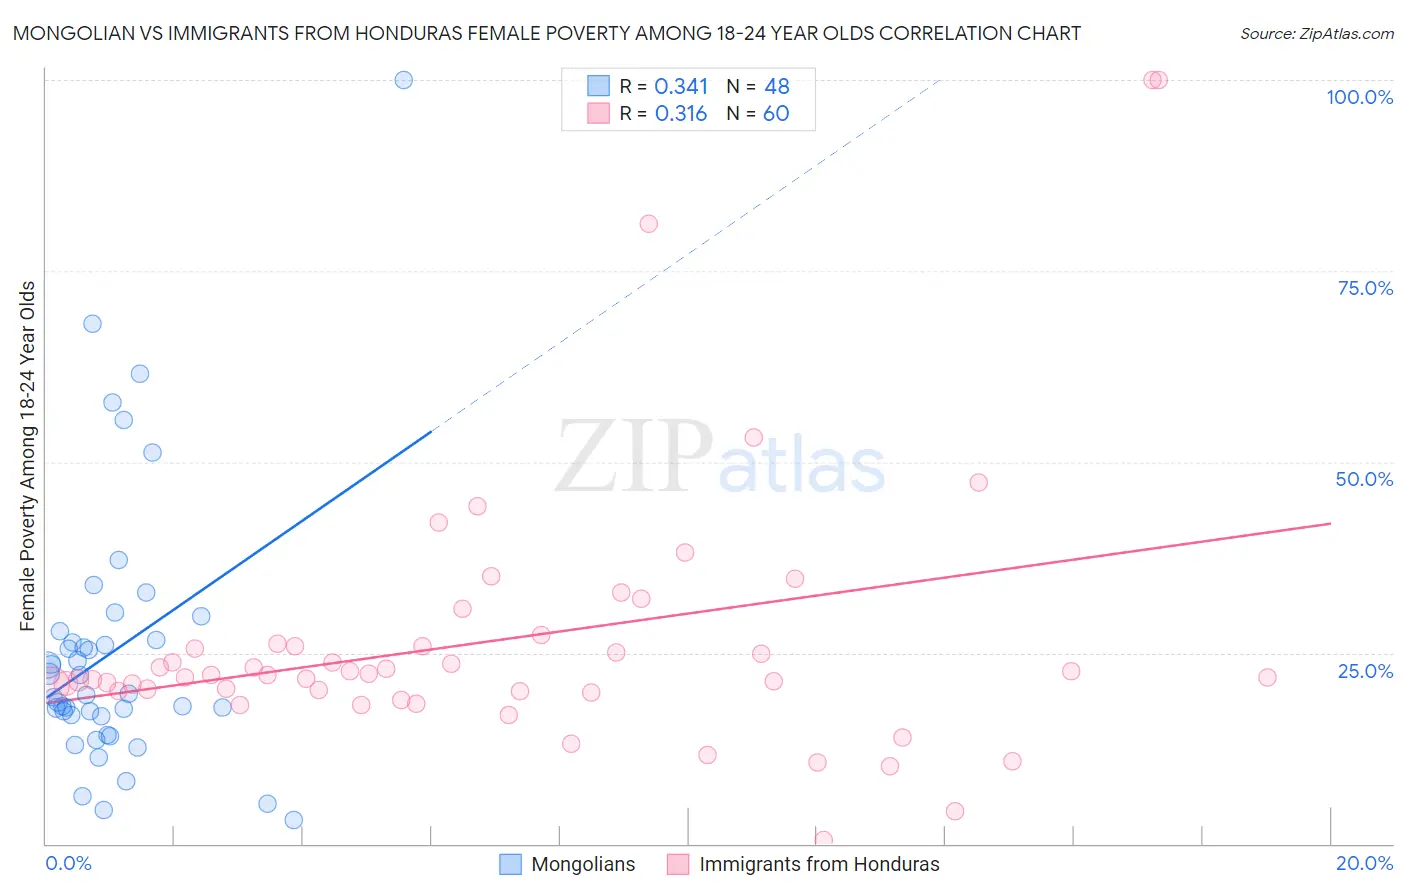 Mongolian vs Immigrants from Honduras Female Poverty Among 18-24 Year Olds